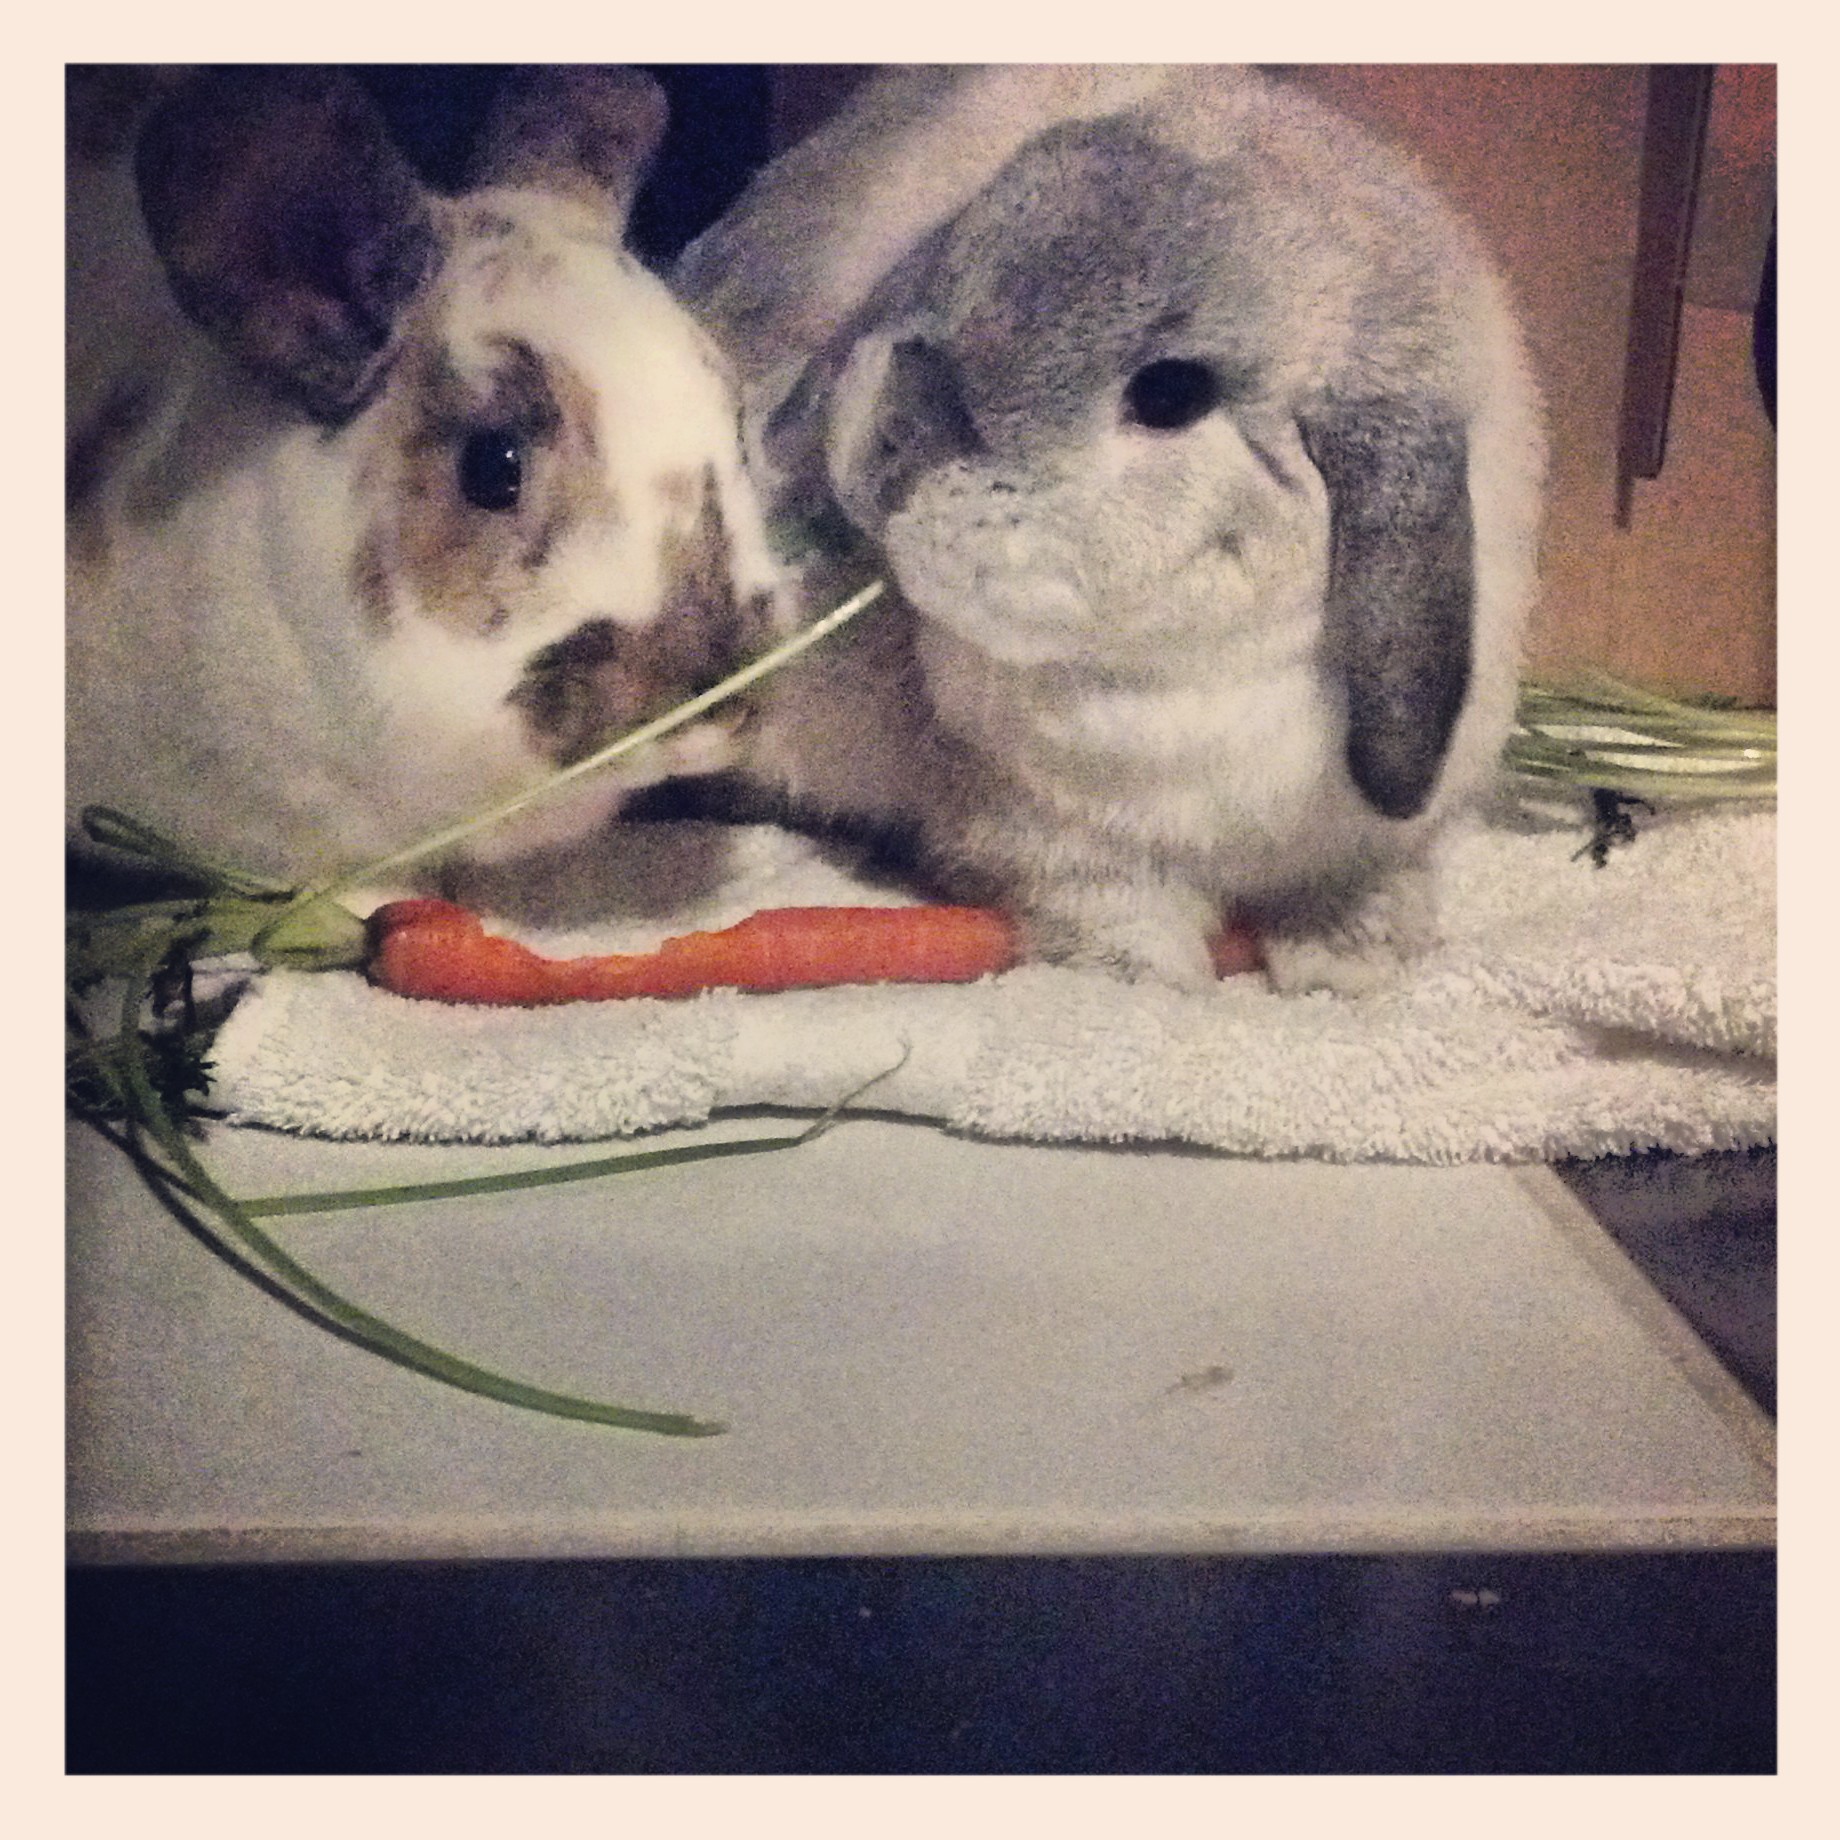 Bunnies Are About to Have a Lady and the Tramp Moment